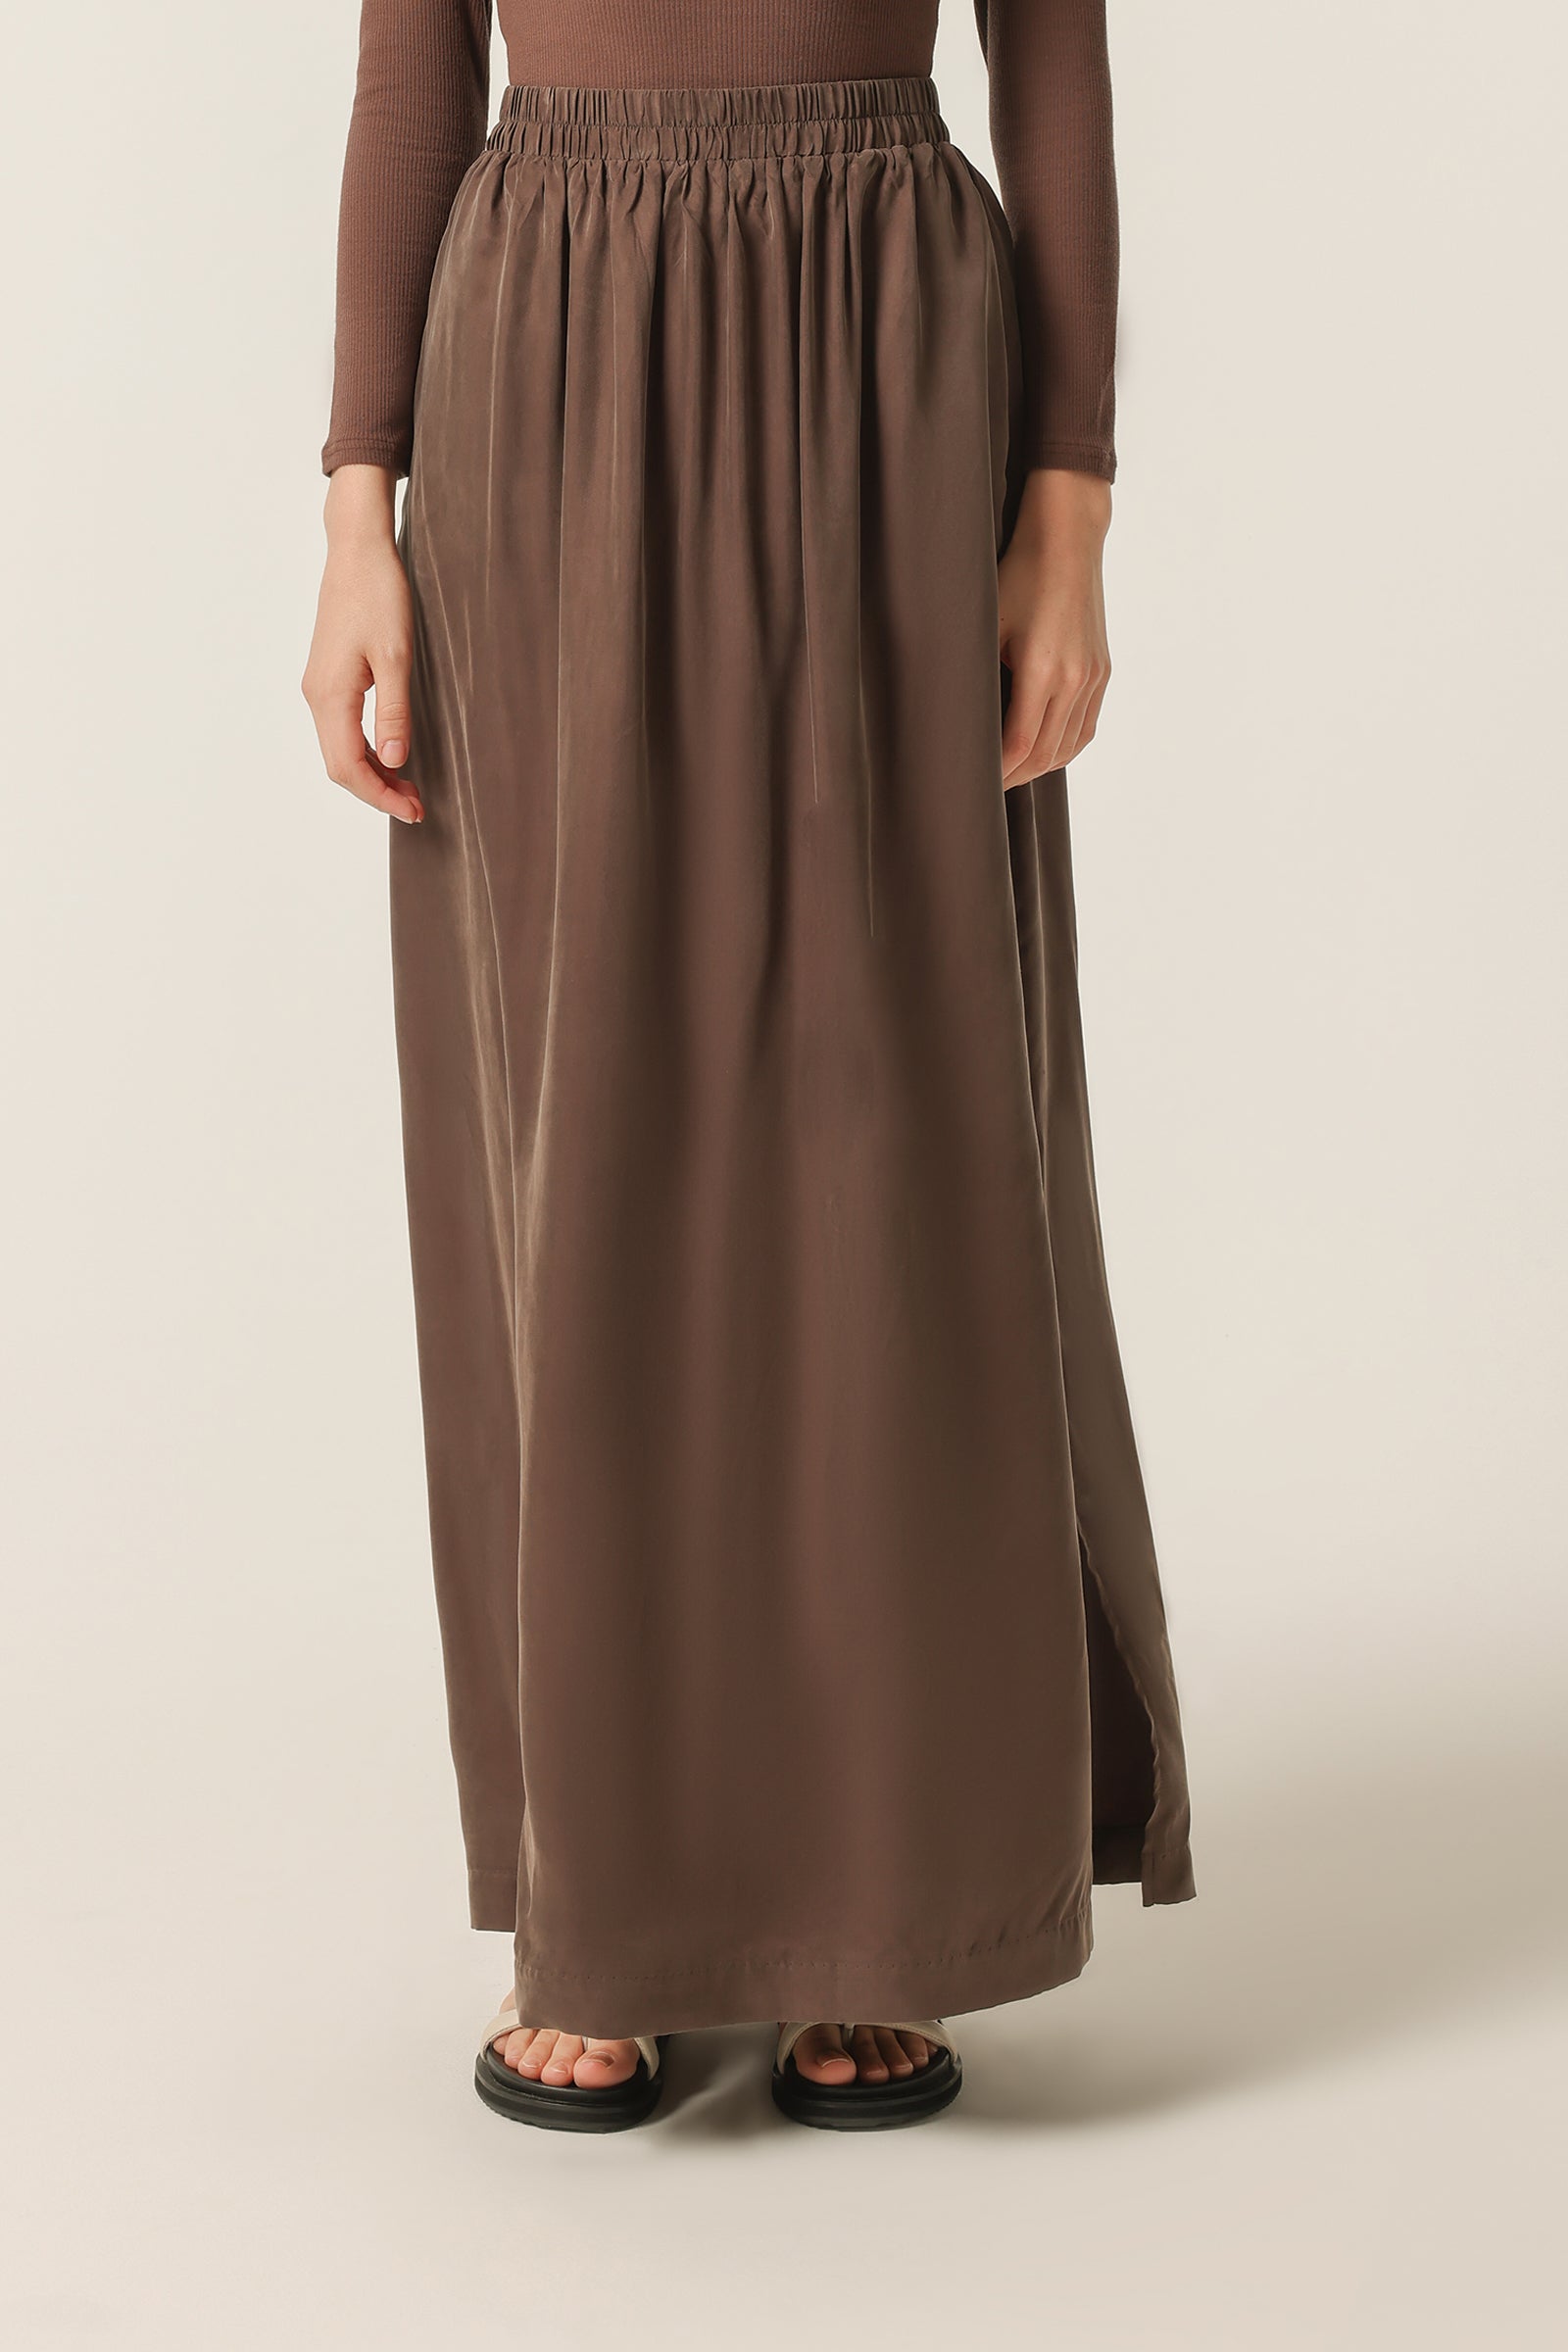 Nude Lucy Gia Cupro Maxi Skirt In A Deep Brown Bark Colour 